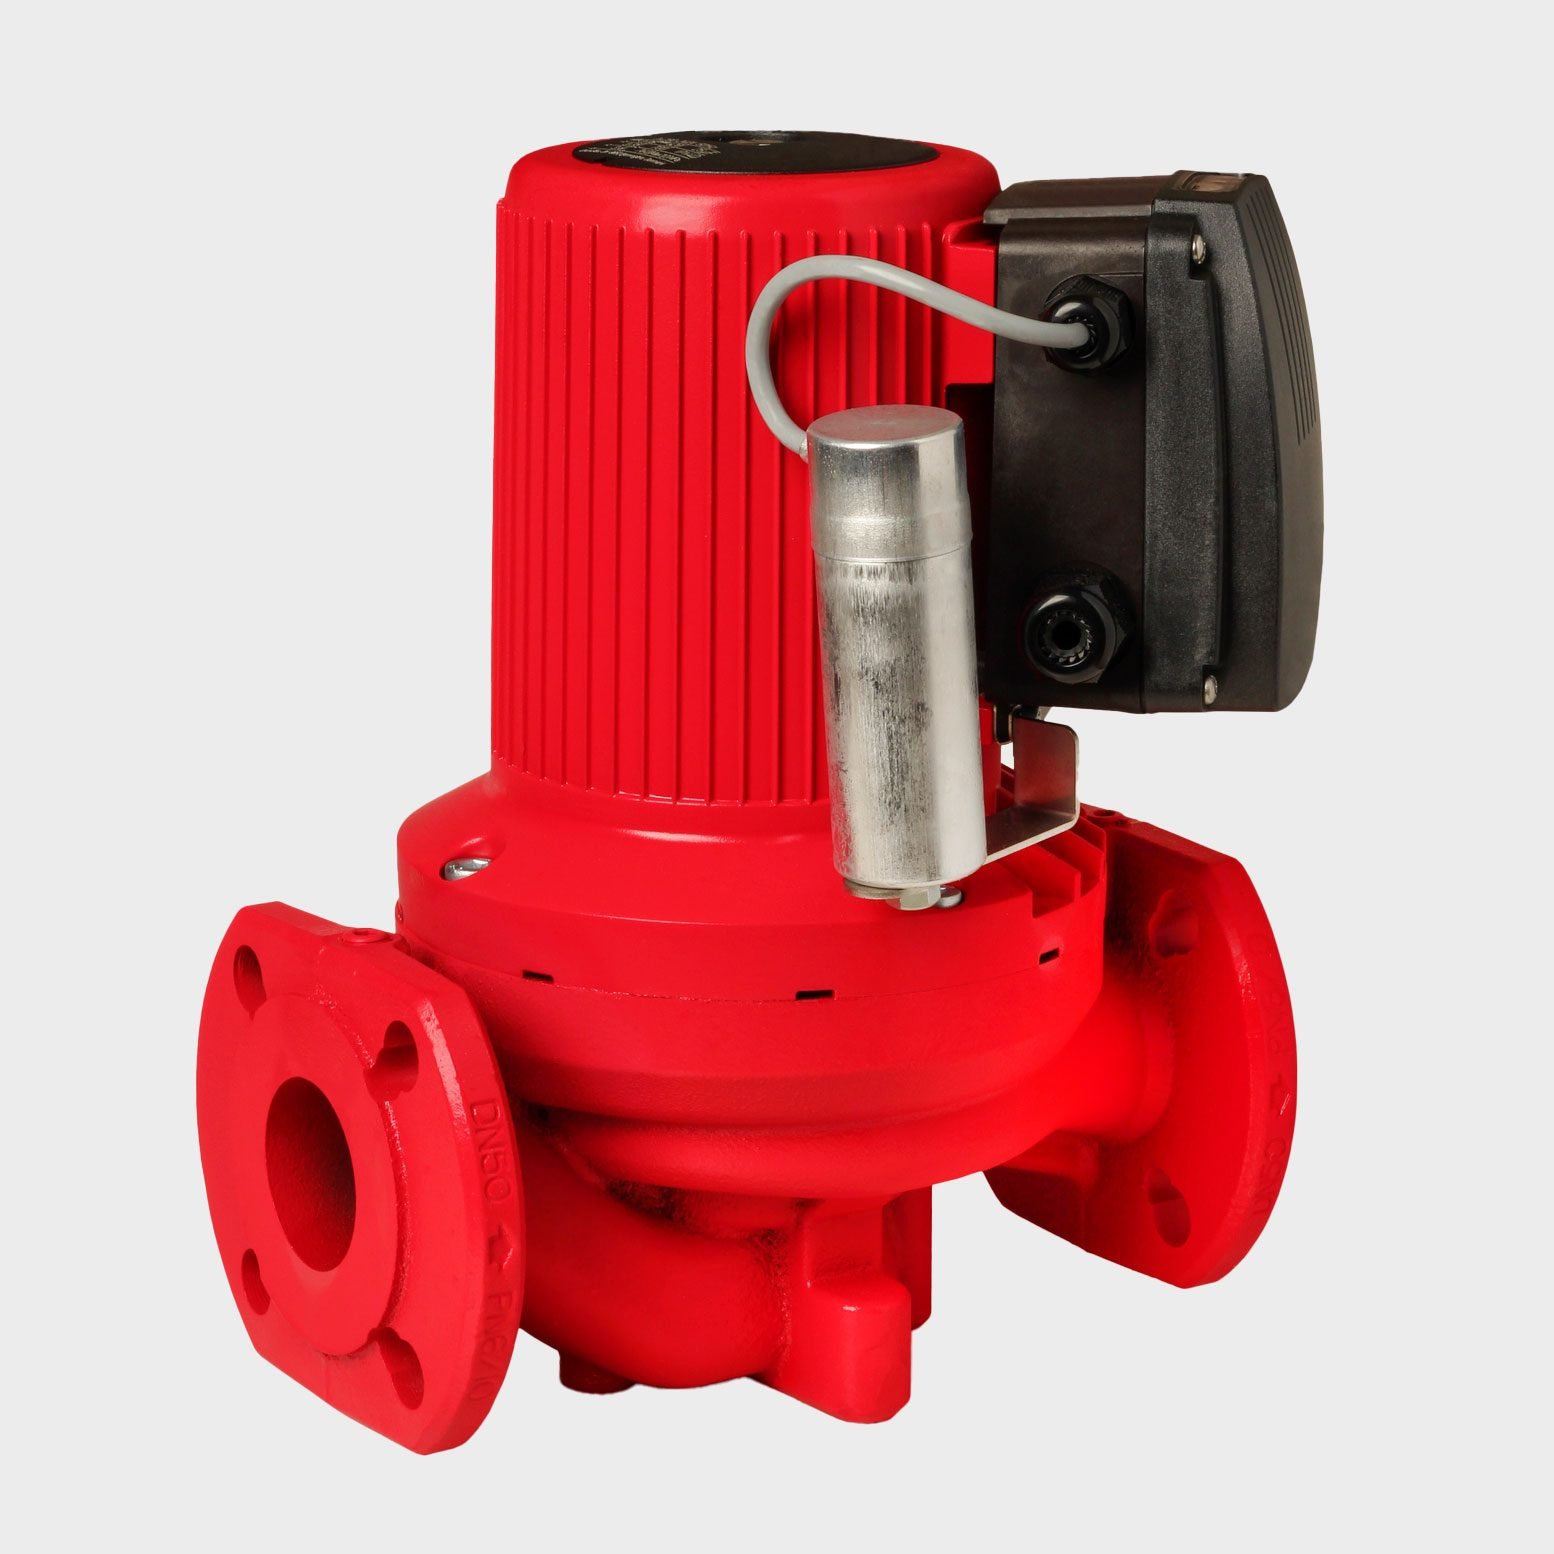 Water Pumps: What You Need to Know